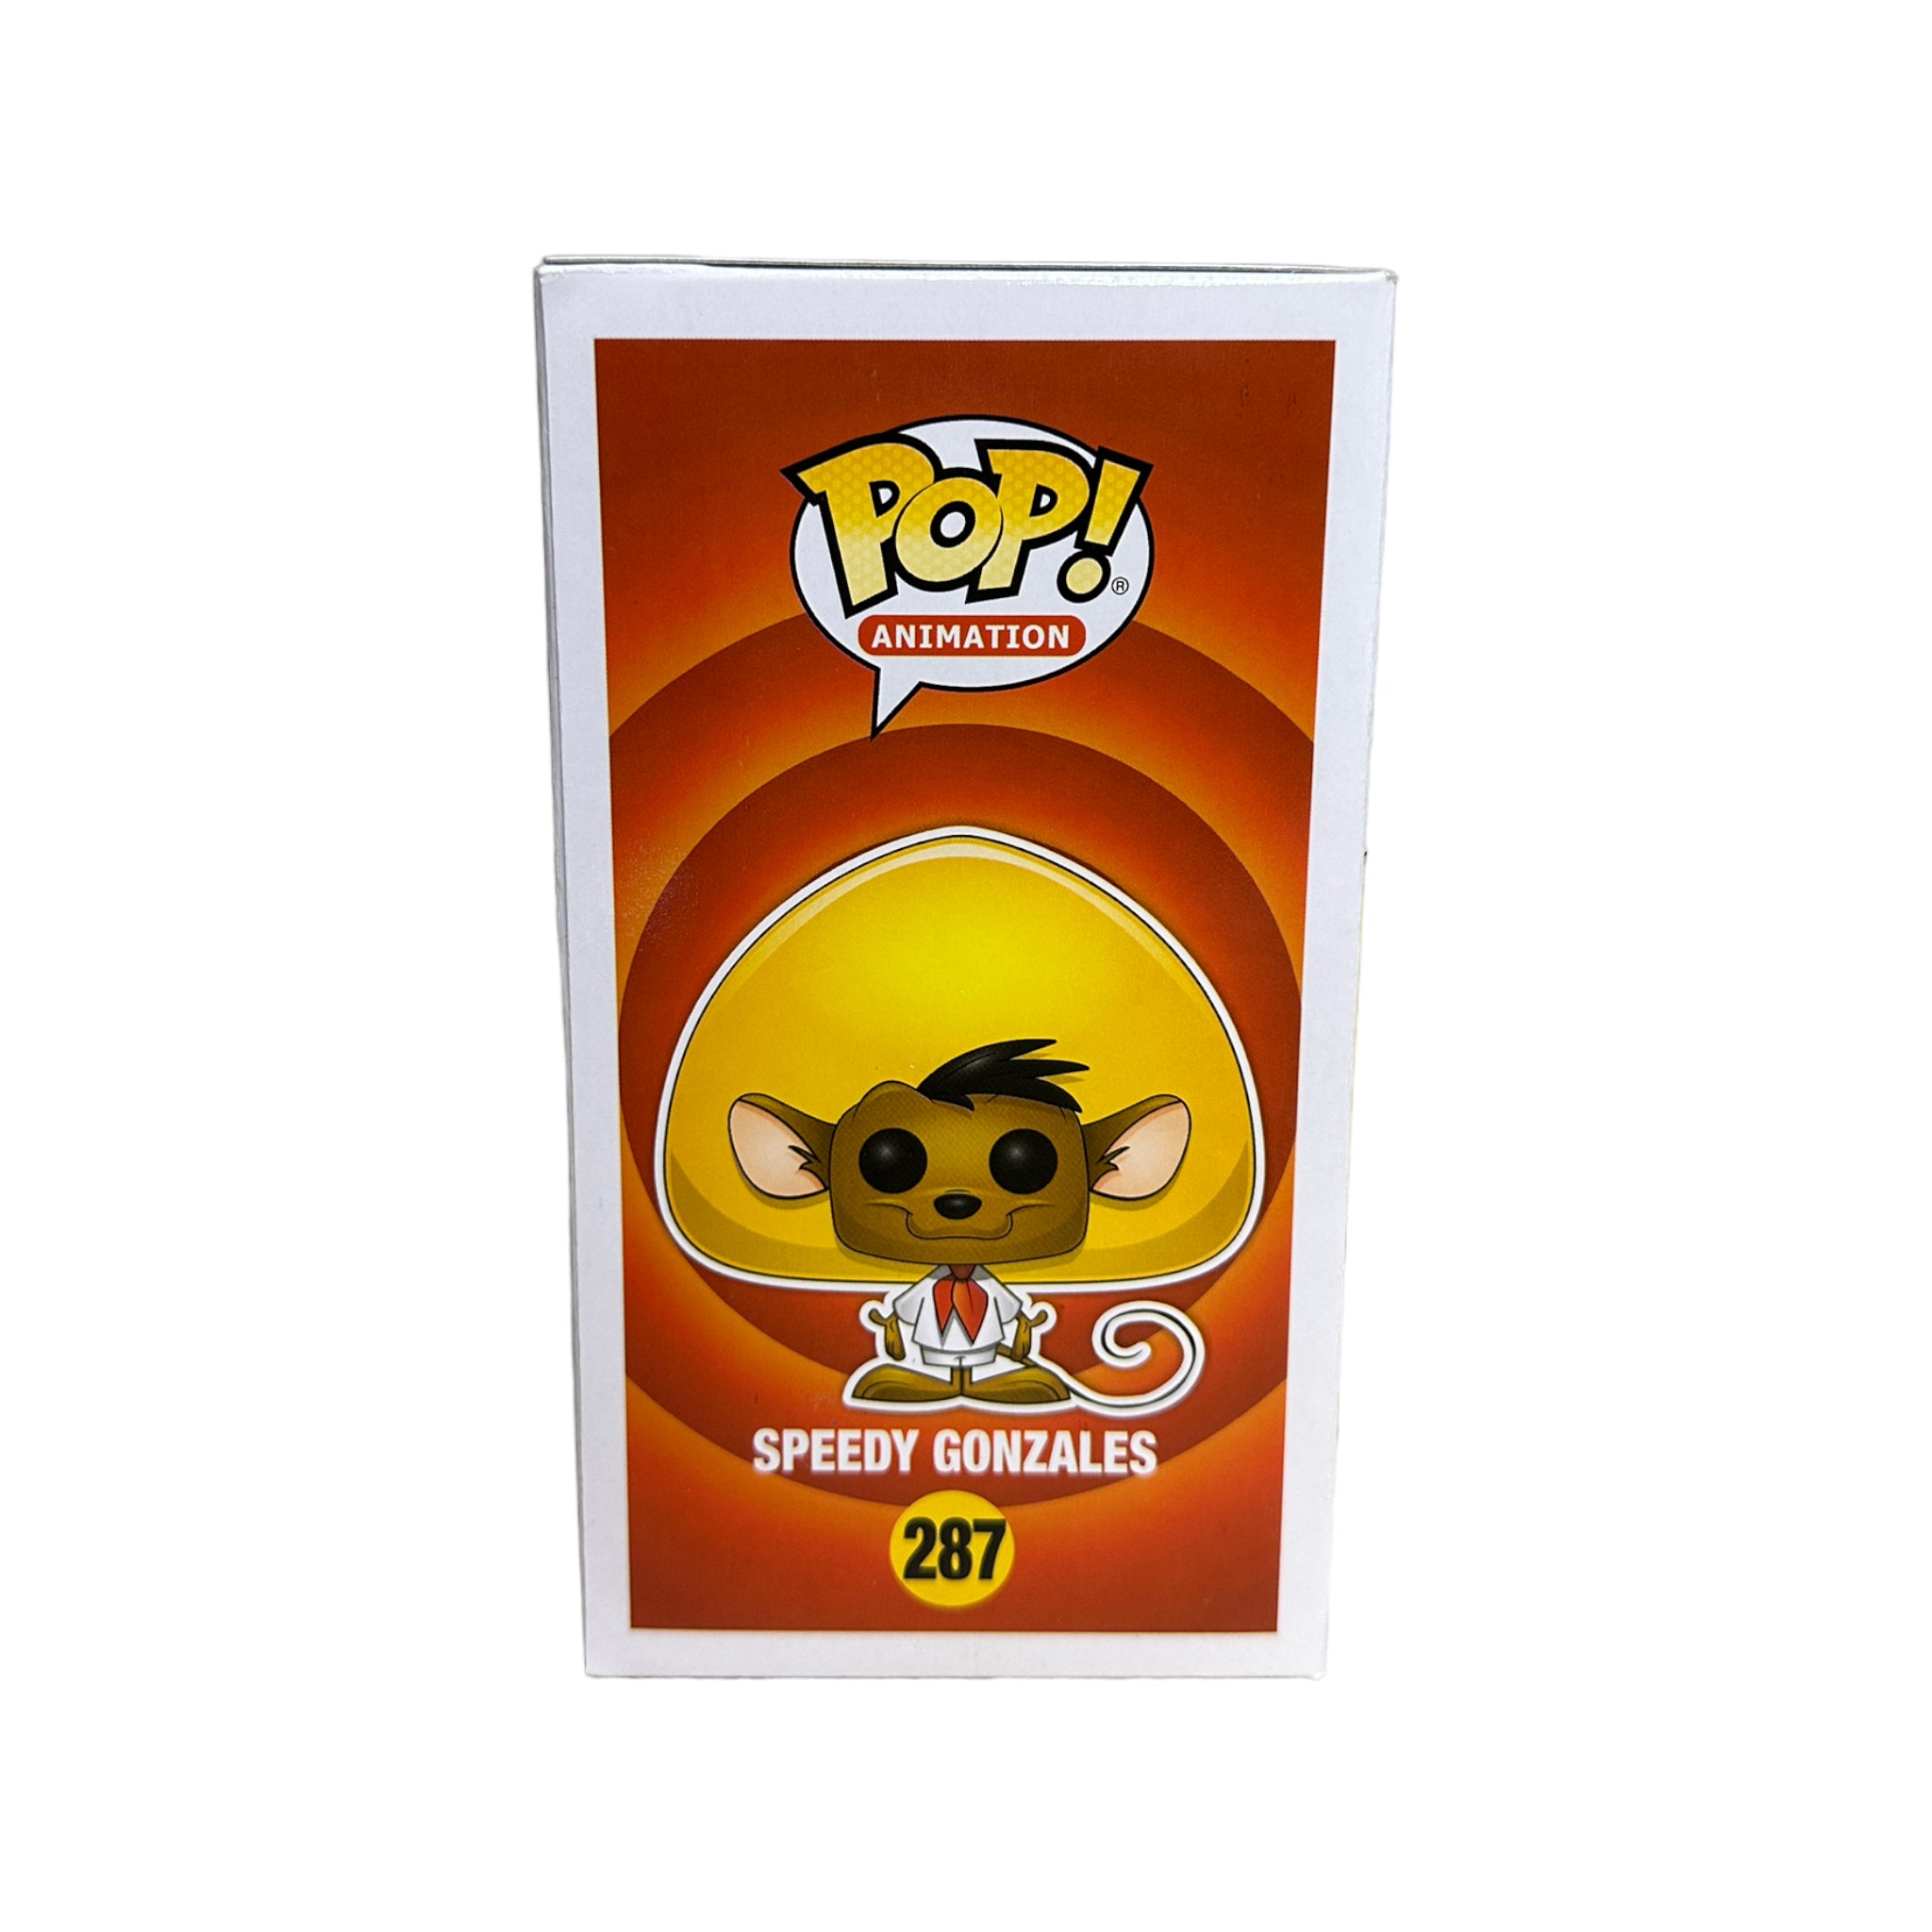 Speedy Gonzales #287 Funko Pop! - Looney Tunes - NYCC 2017 Shared Exclusive LE3500 Pcs - Condition 6/10